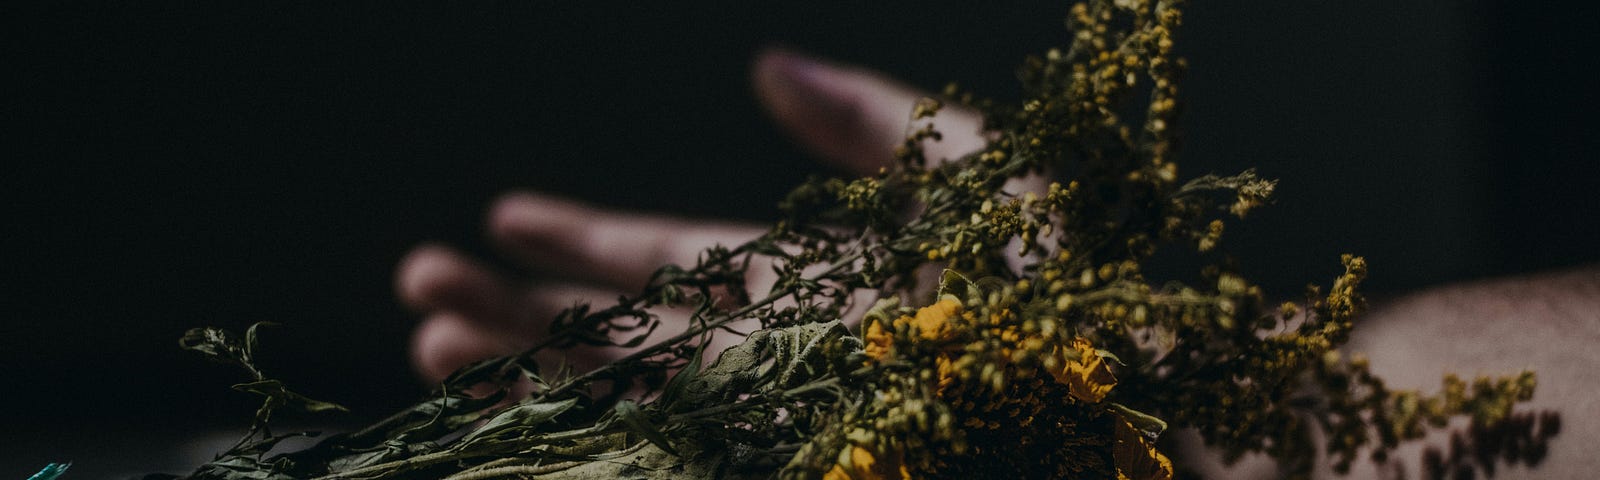 Hand lying down on a floor against a black background. Yellow flower is in front of the hand.